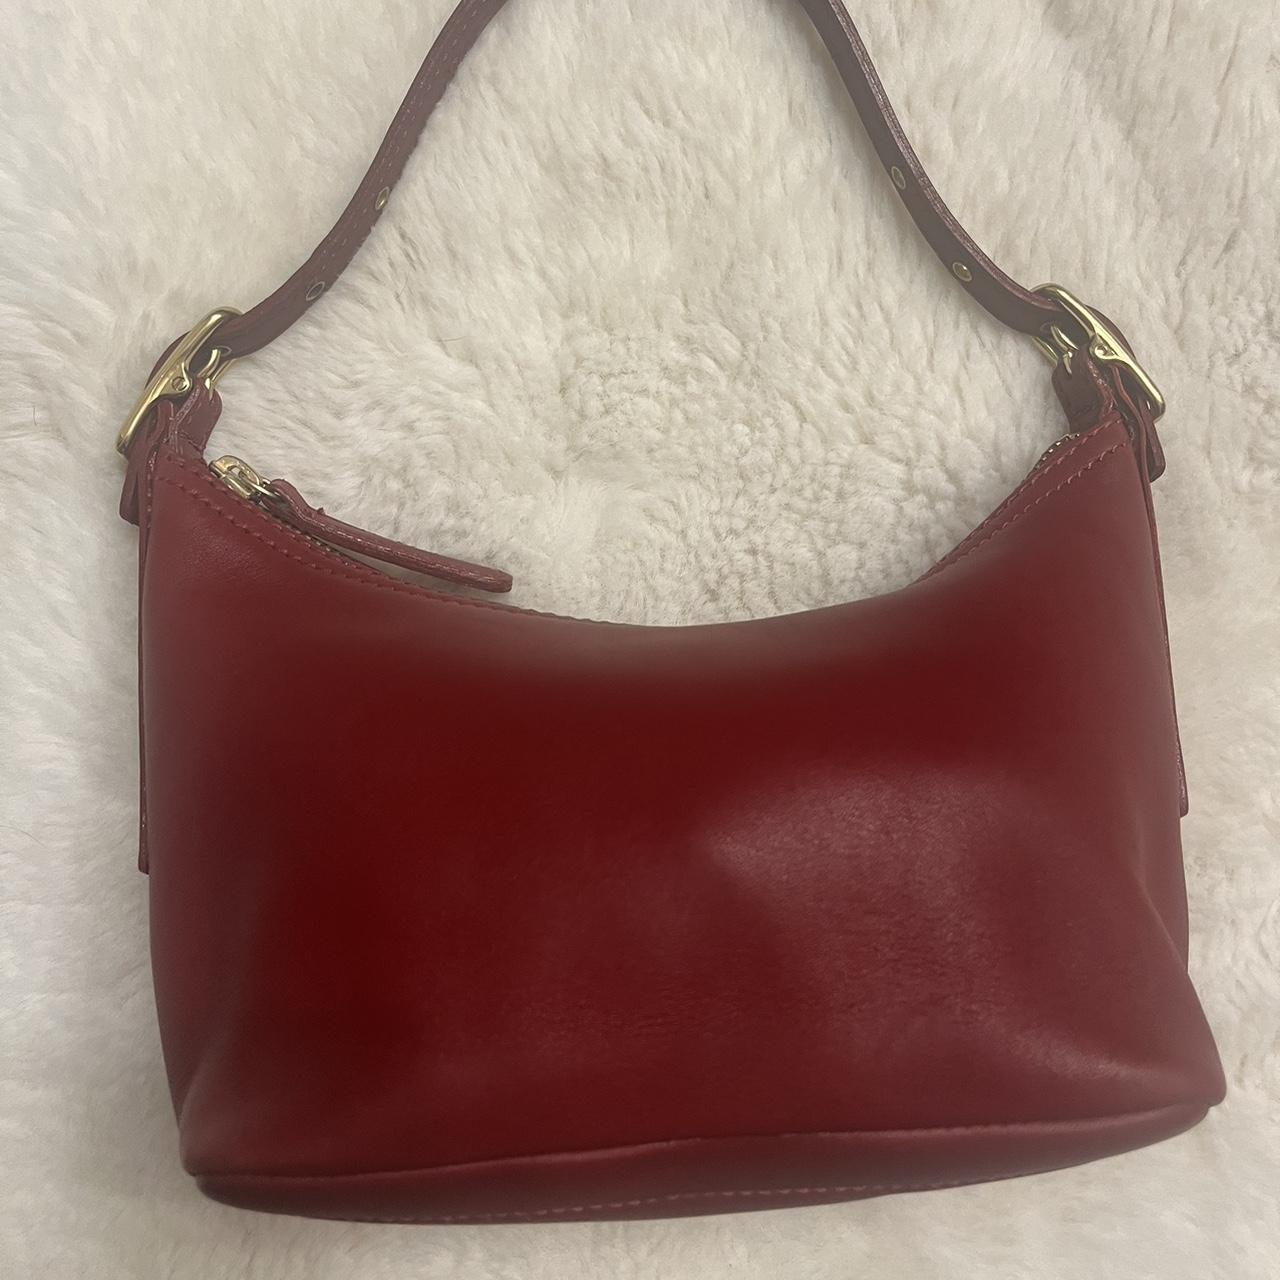 I just saw this Coach purse today and immediately thought it was early  2000s again : r/handbags